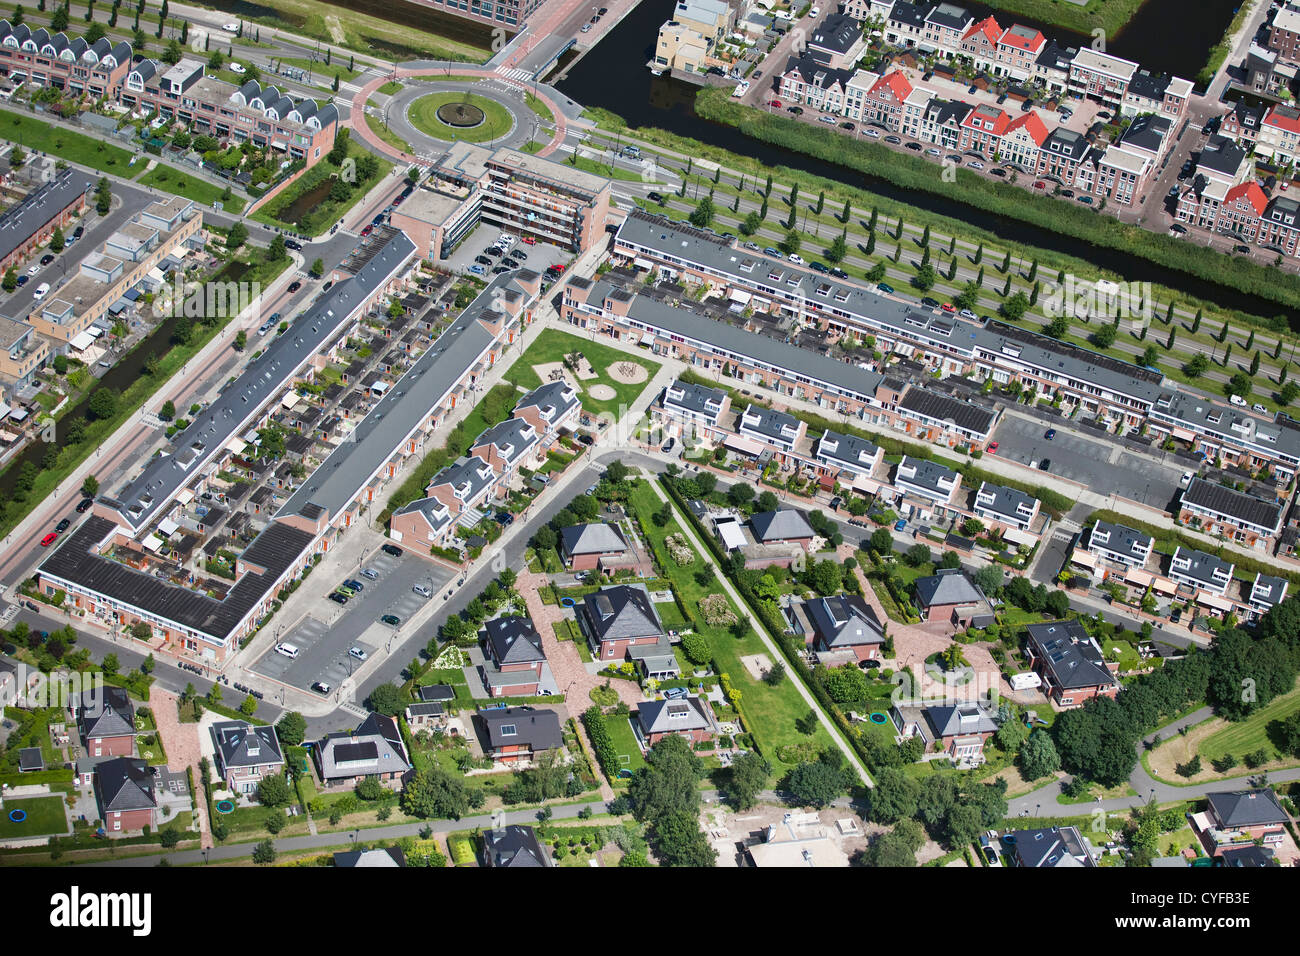 The Netherlands, Amersfoort, residential district called Vathorst. Aerial. Stock Photo